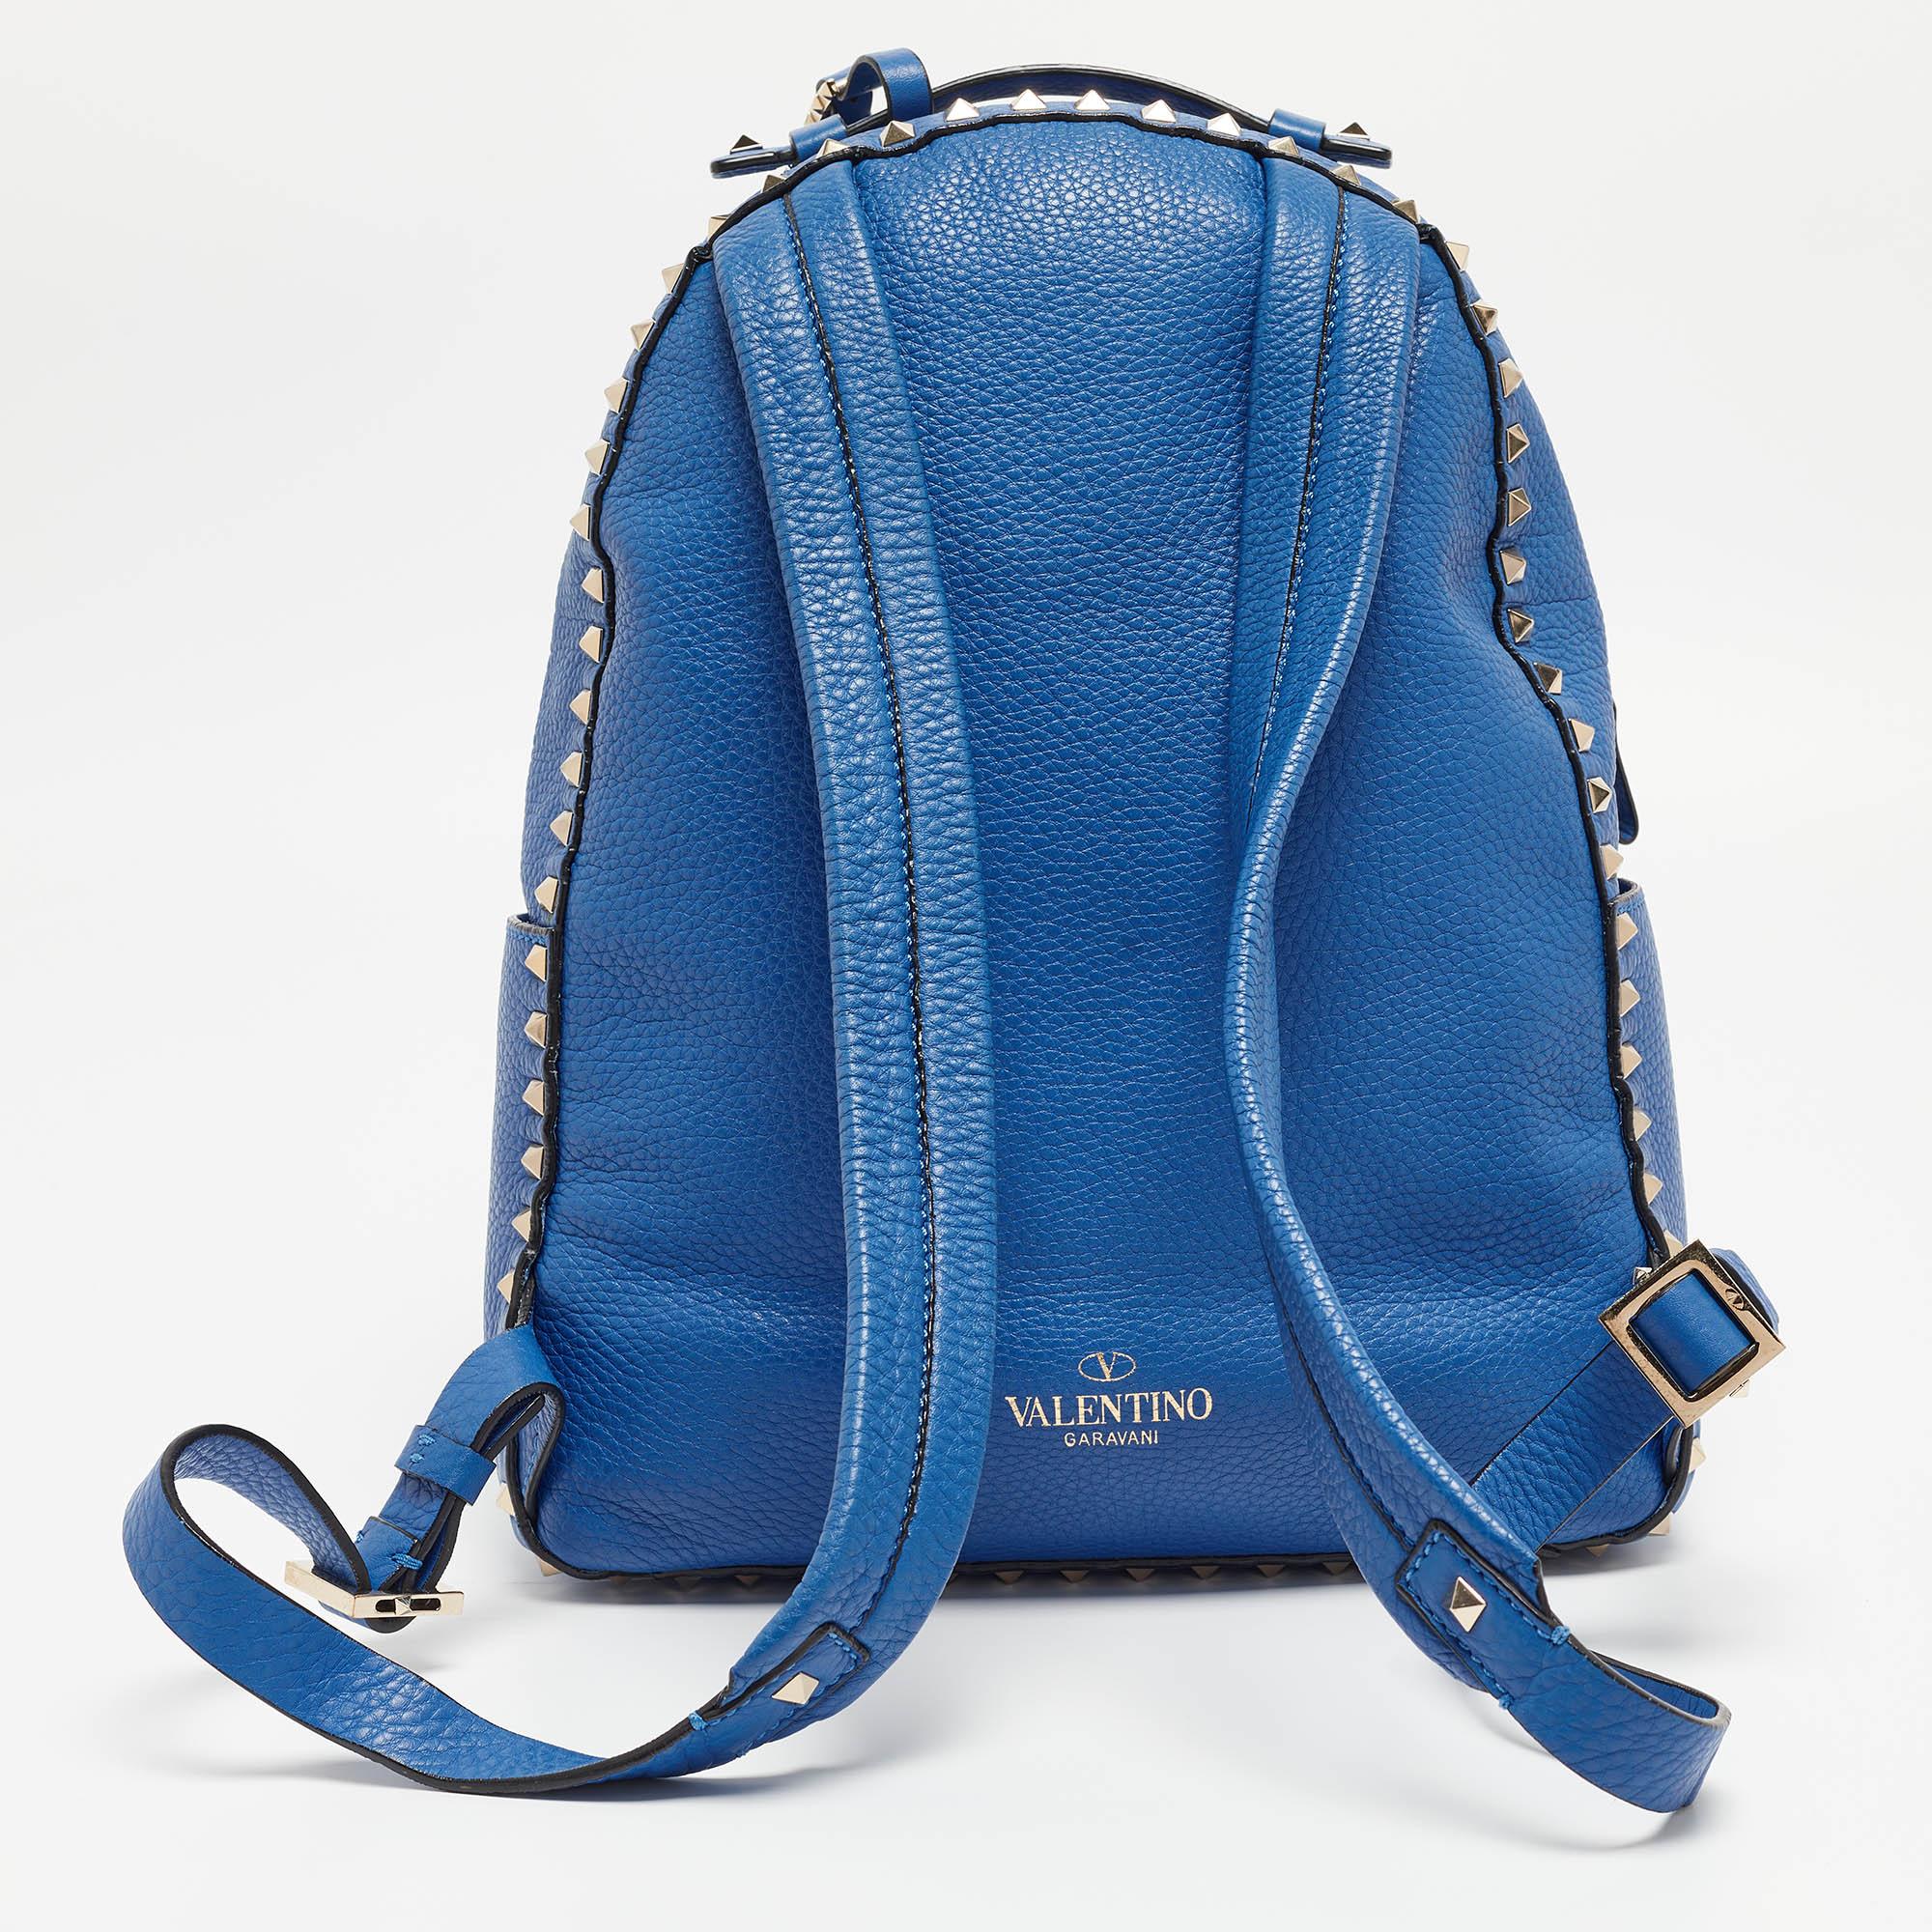 Marked by flawless craftsmanship and enduring appeal, this Valentino blue backpack is bound to be a versatile and durable accessory. It has a practical size.

